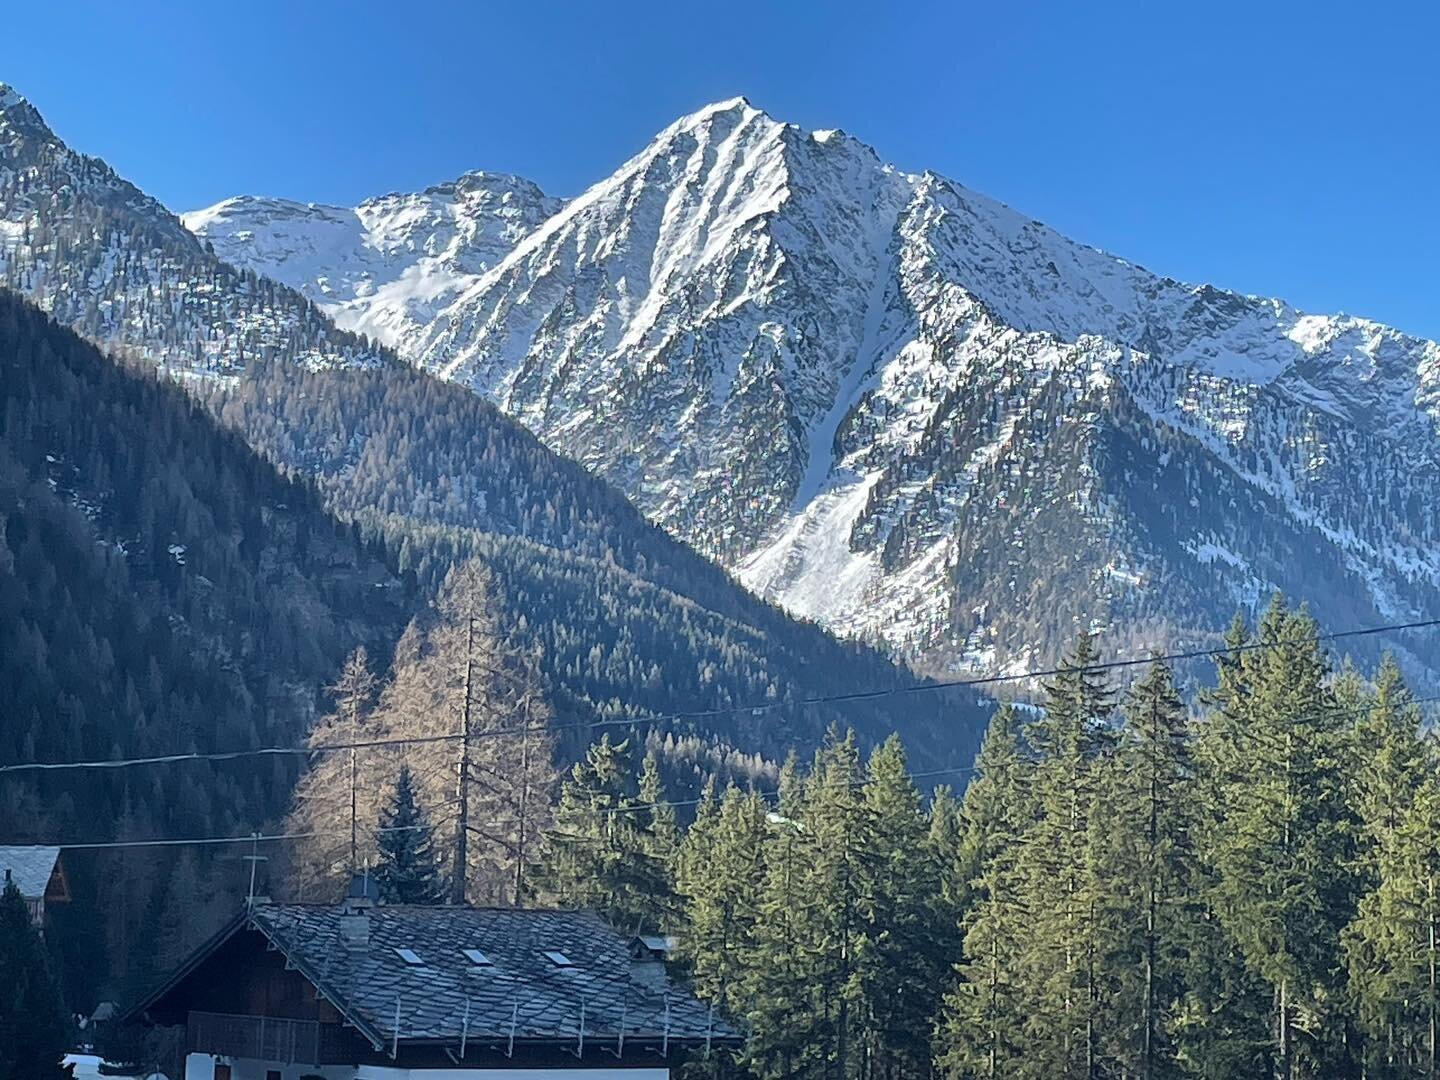 Hope everyone had a great Easter Sunday, another terrible day here!😉

#forestrow #eastgrinstead #tunbridgewells #osteopathy #osteopathyworks #osteopathyforhealth #snowboarding #italy #monterosa #frachey #champoluc #easter #eastersunday #easterweeken